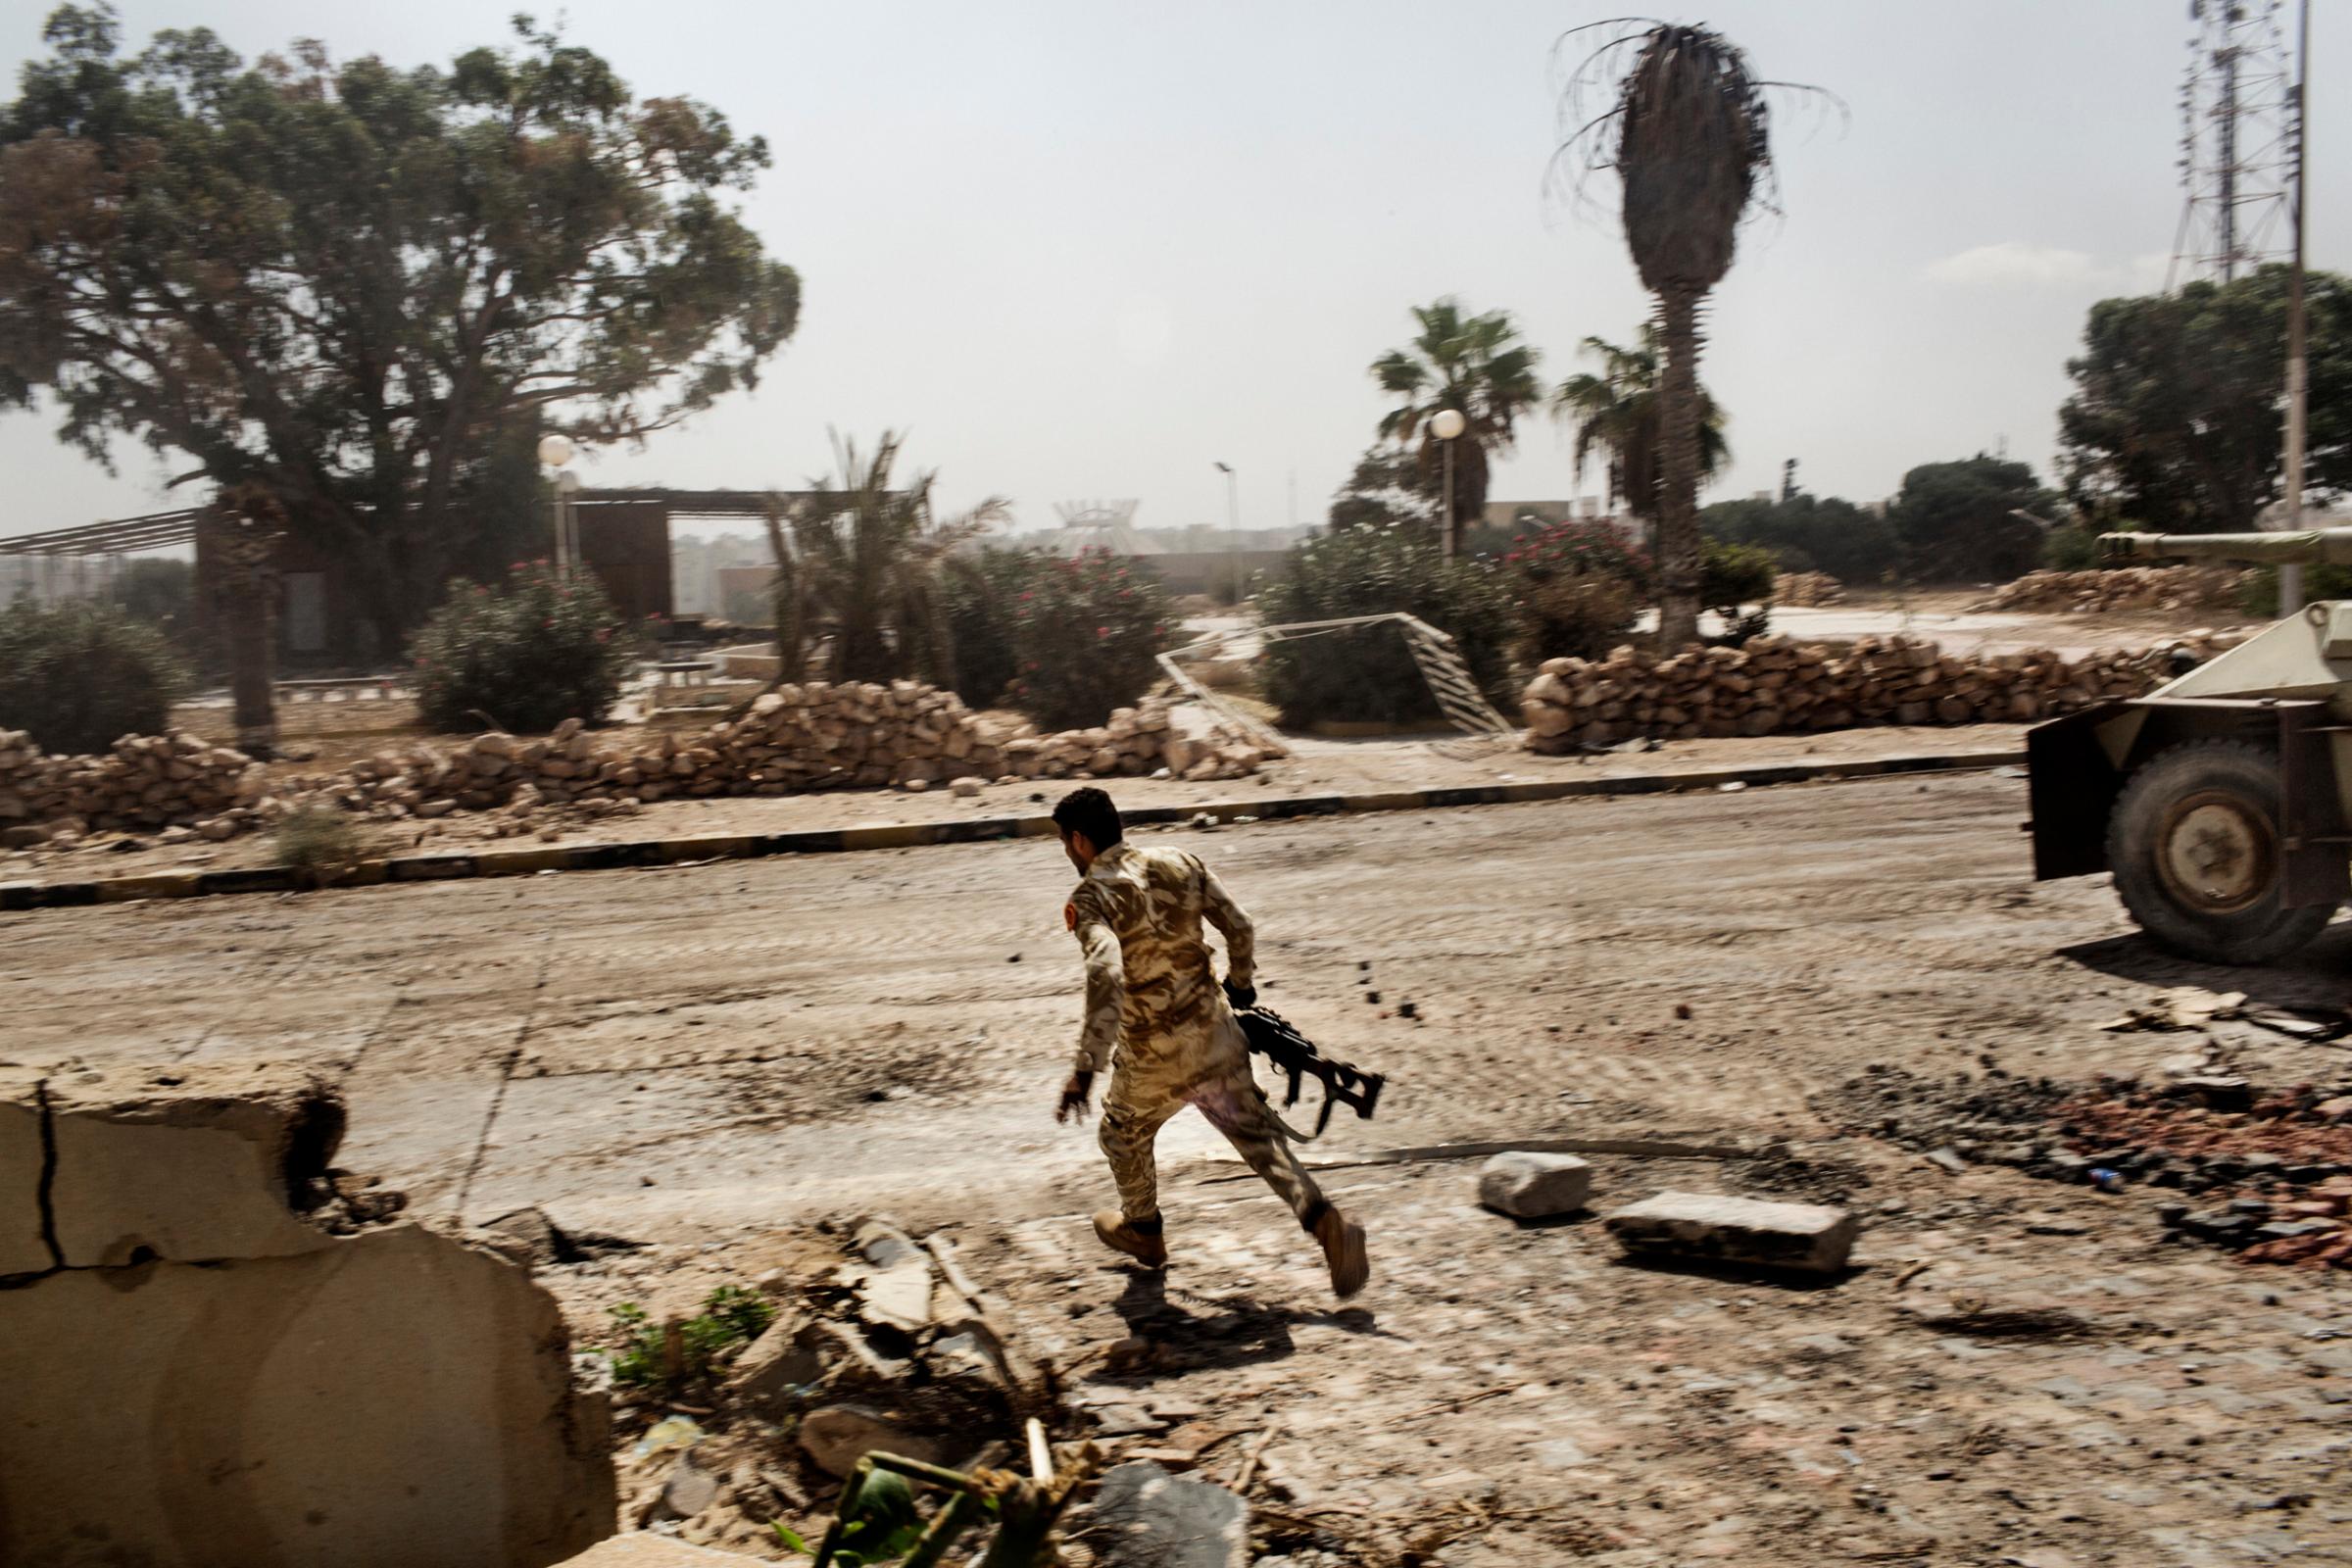 A Libyan fighter affiliated with forces of the Tripoli government runs for cover while fighting against Islamic State positions in Sirte, Libya, Sept. 22, 2016.